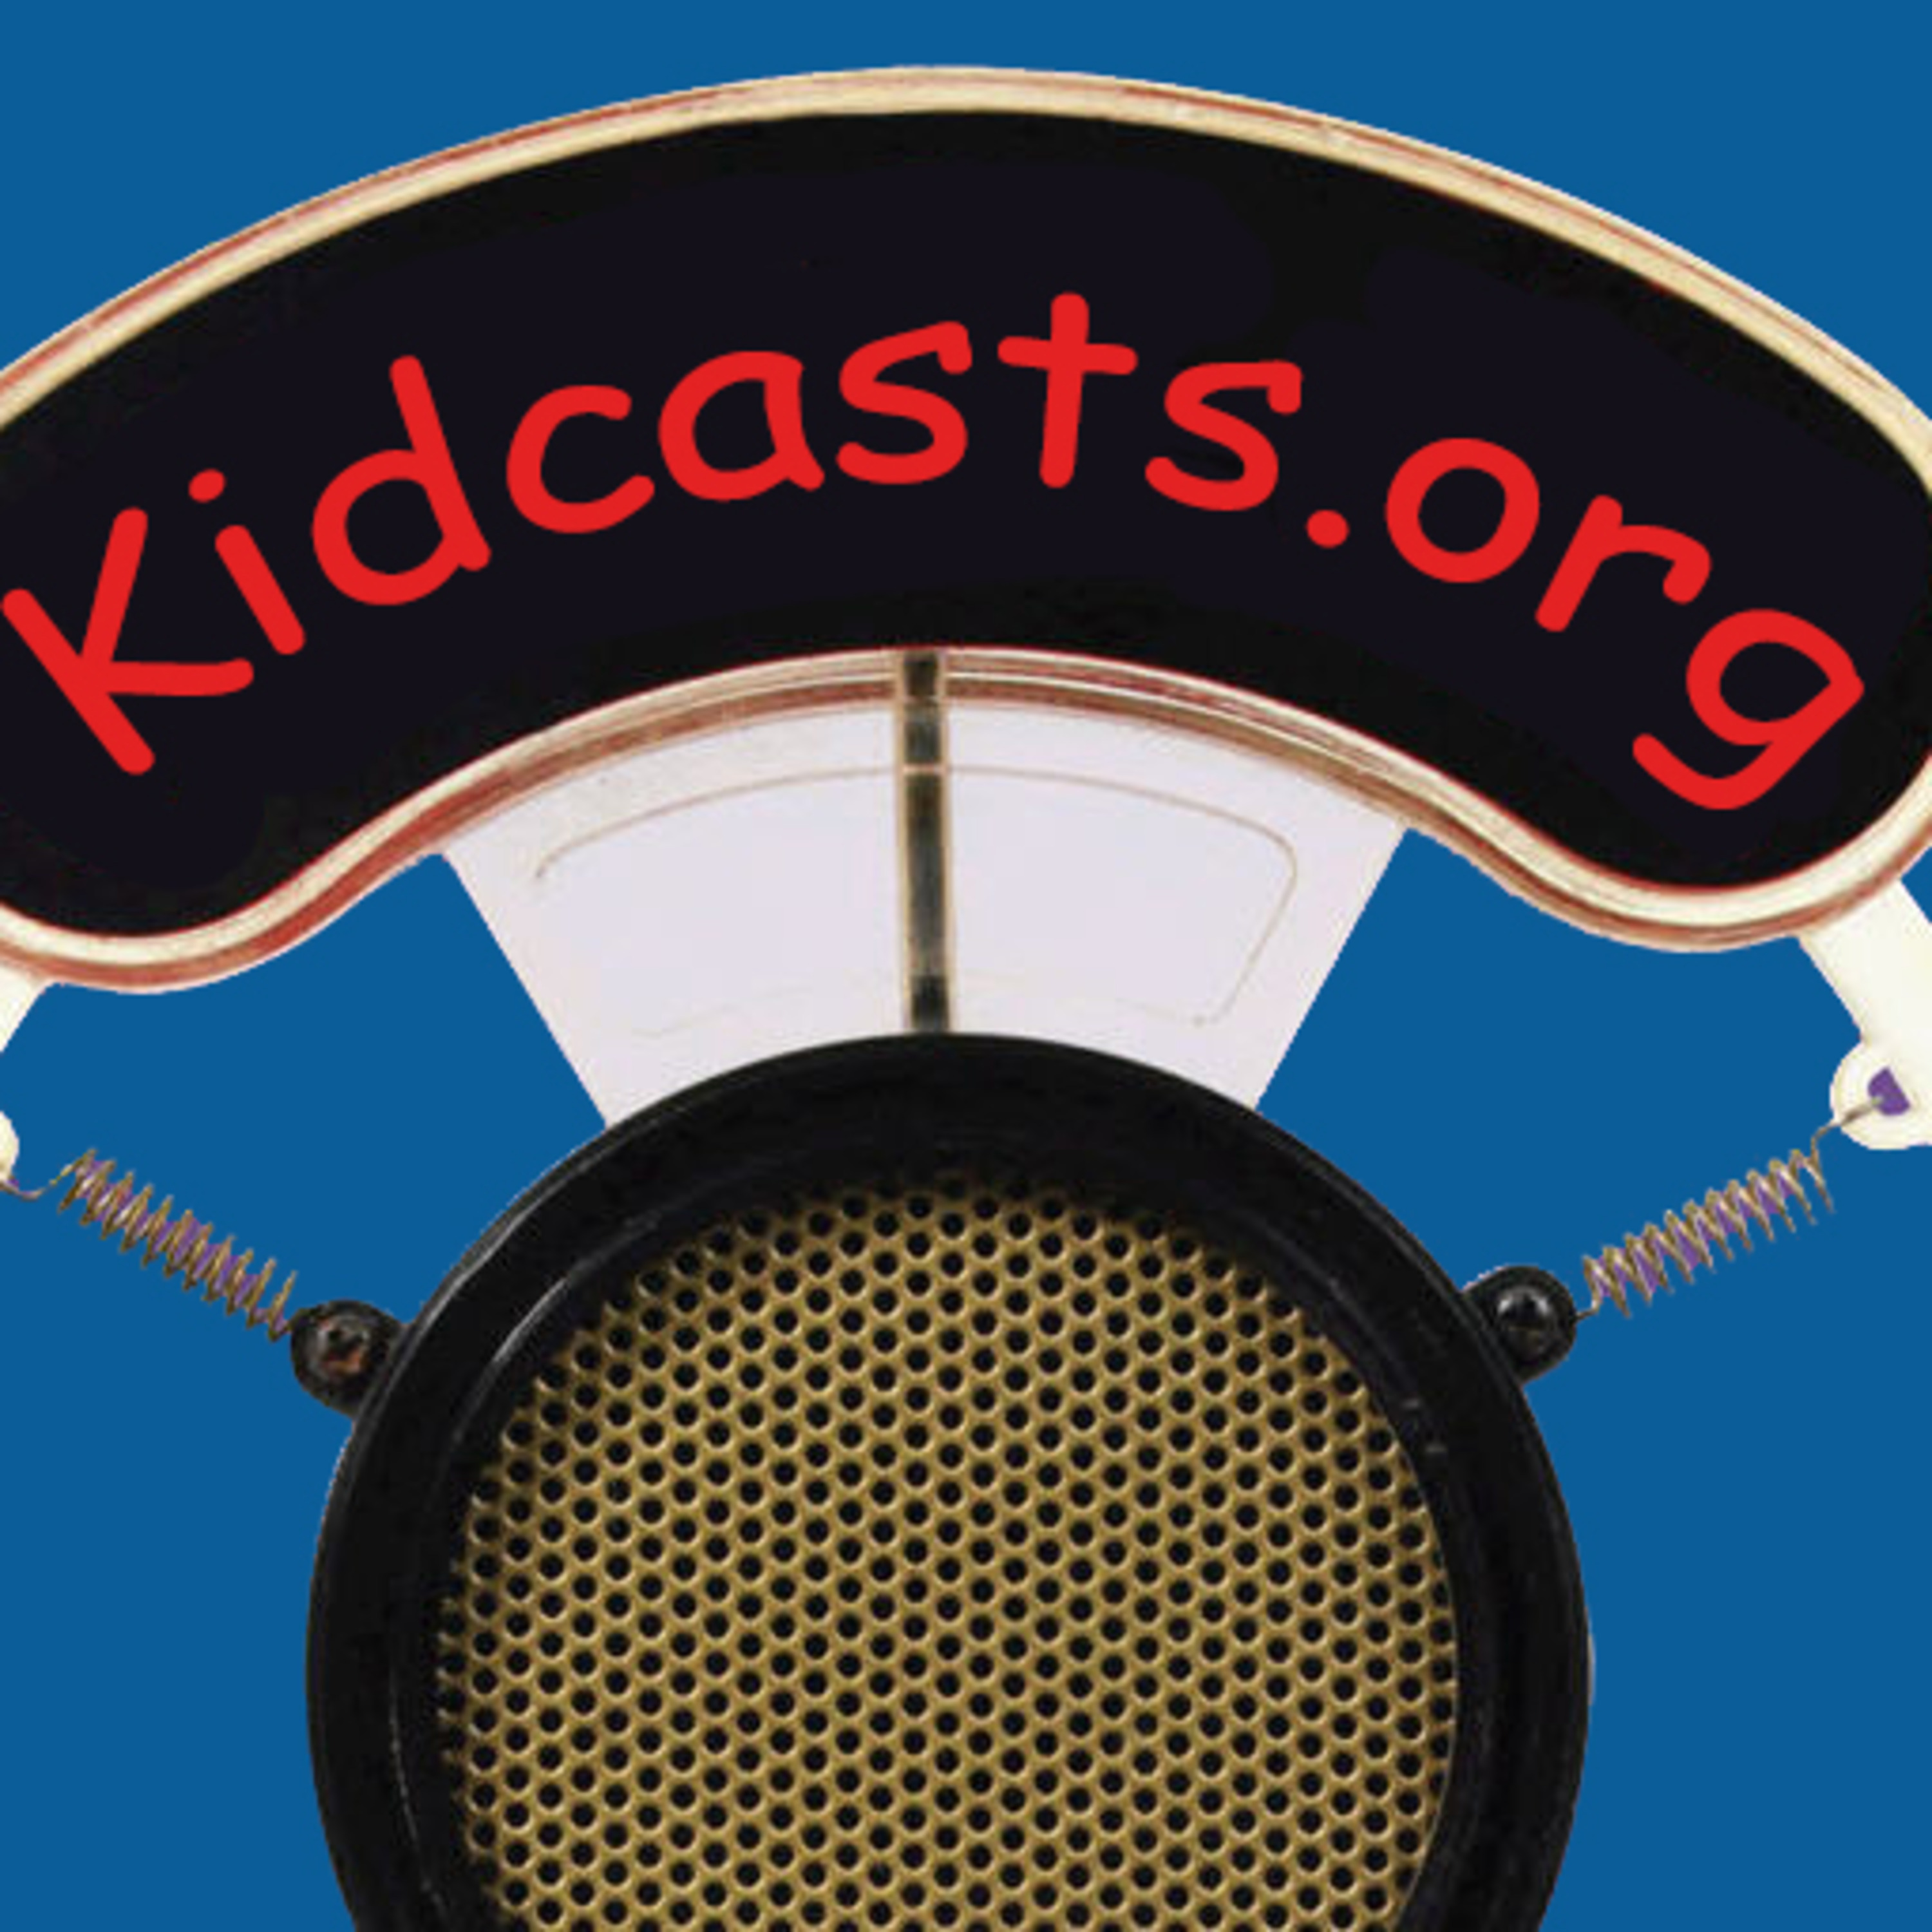 Kidcasts.org